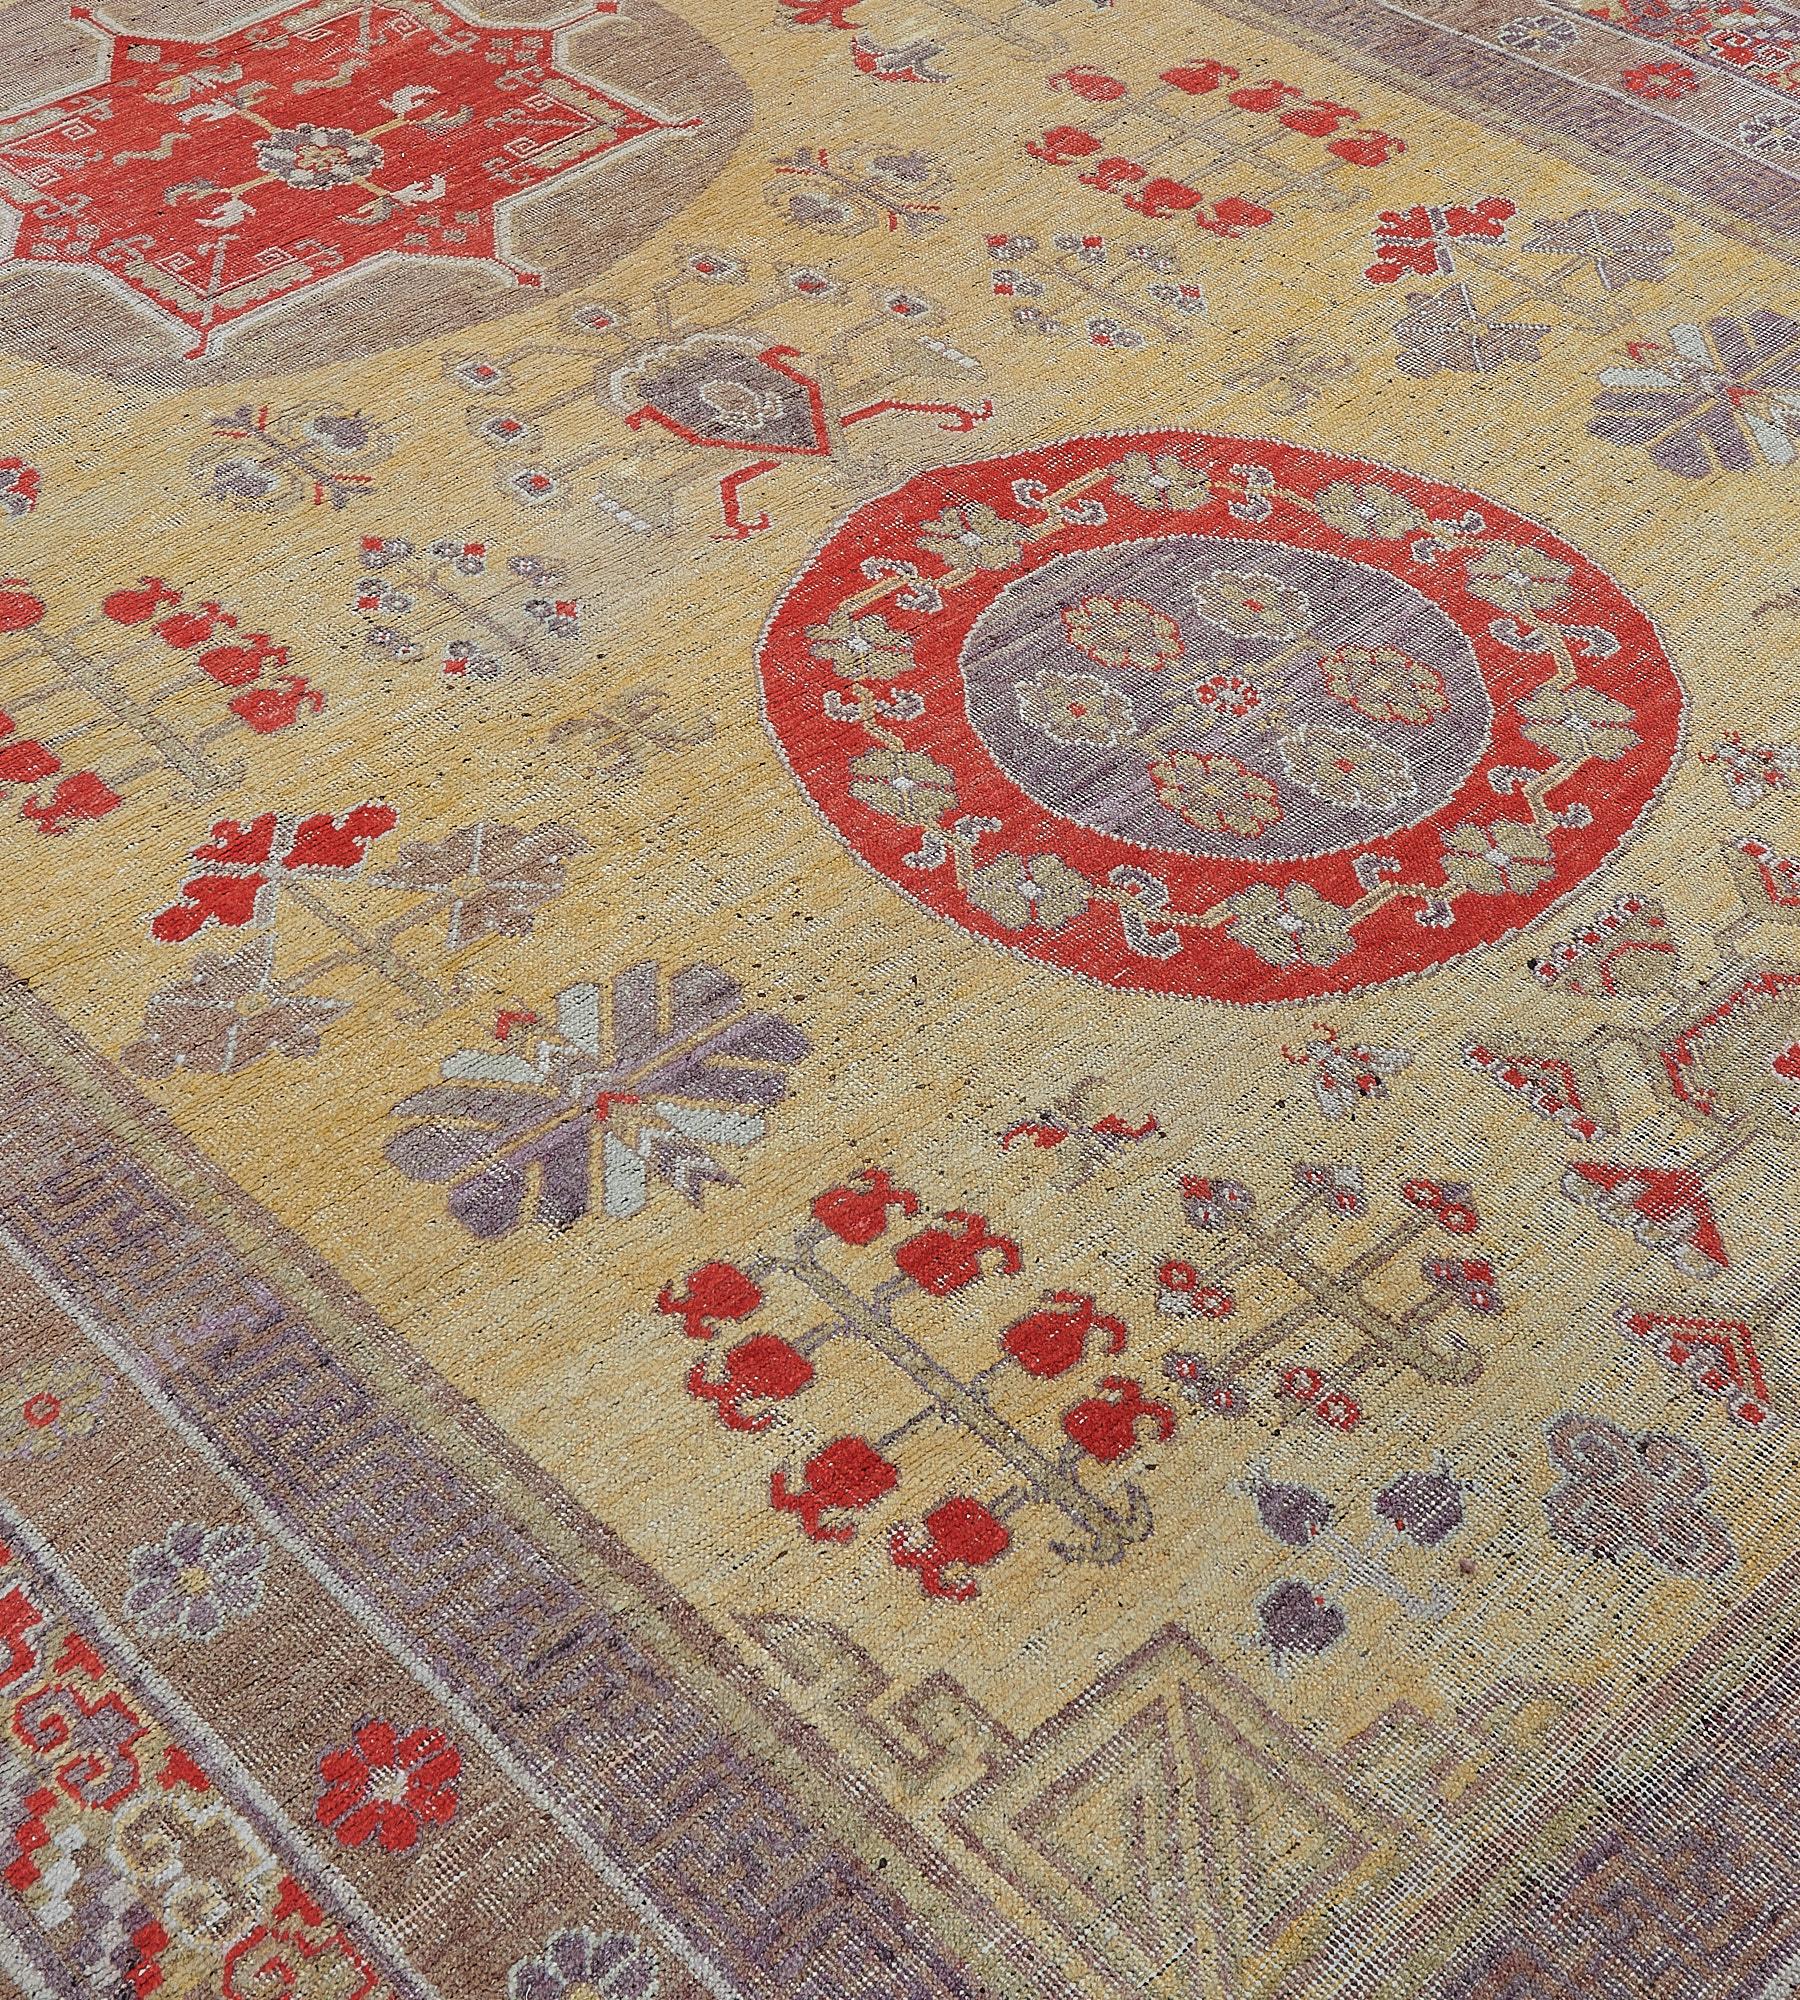 This antique, circa 1880, Khotan rug has a golden-yellow field with a variety of scattered stylized flowers and floral motifs around a column of three roundels linked by an angular hooked plant motif, the central mole-brown roundel containing a